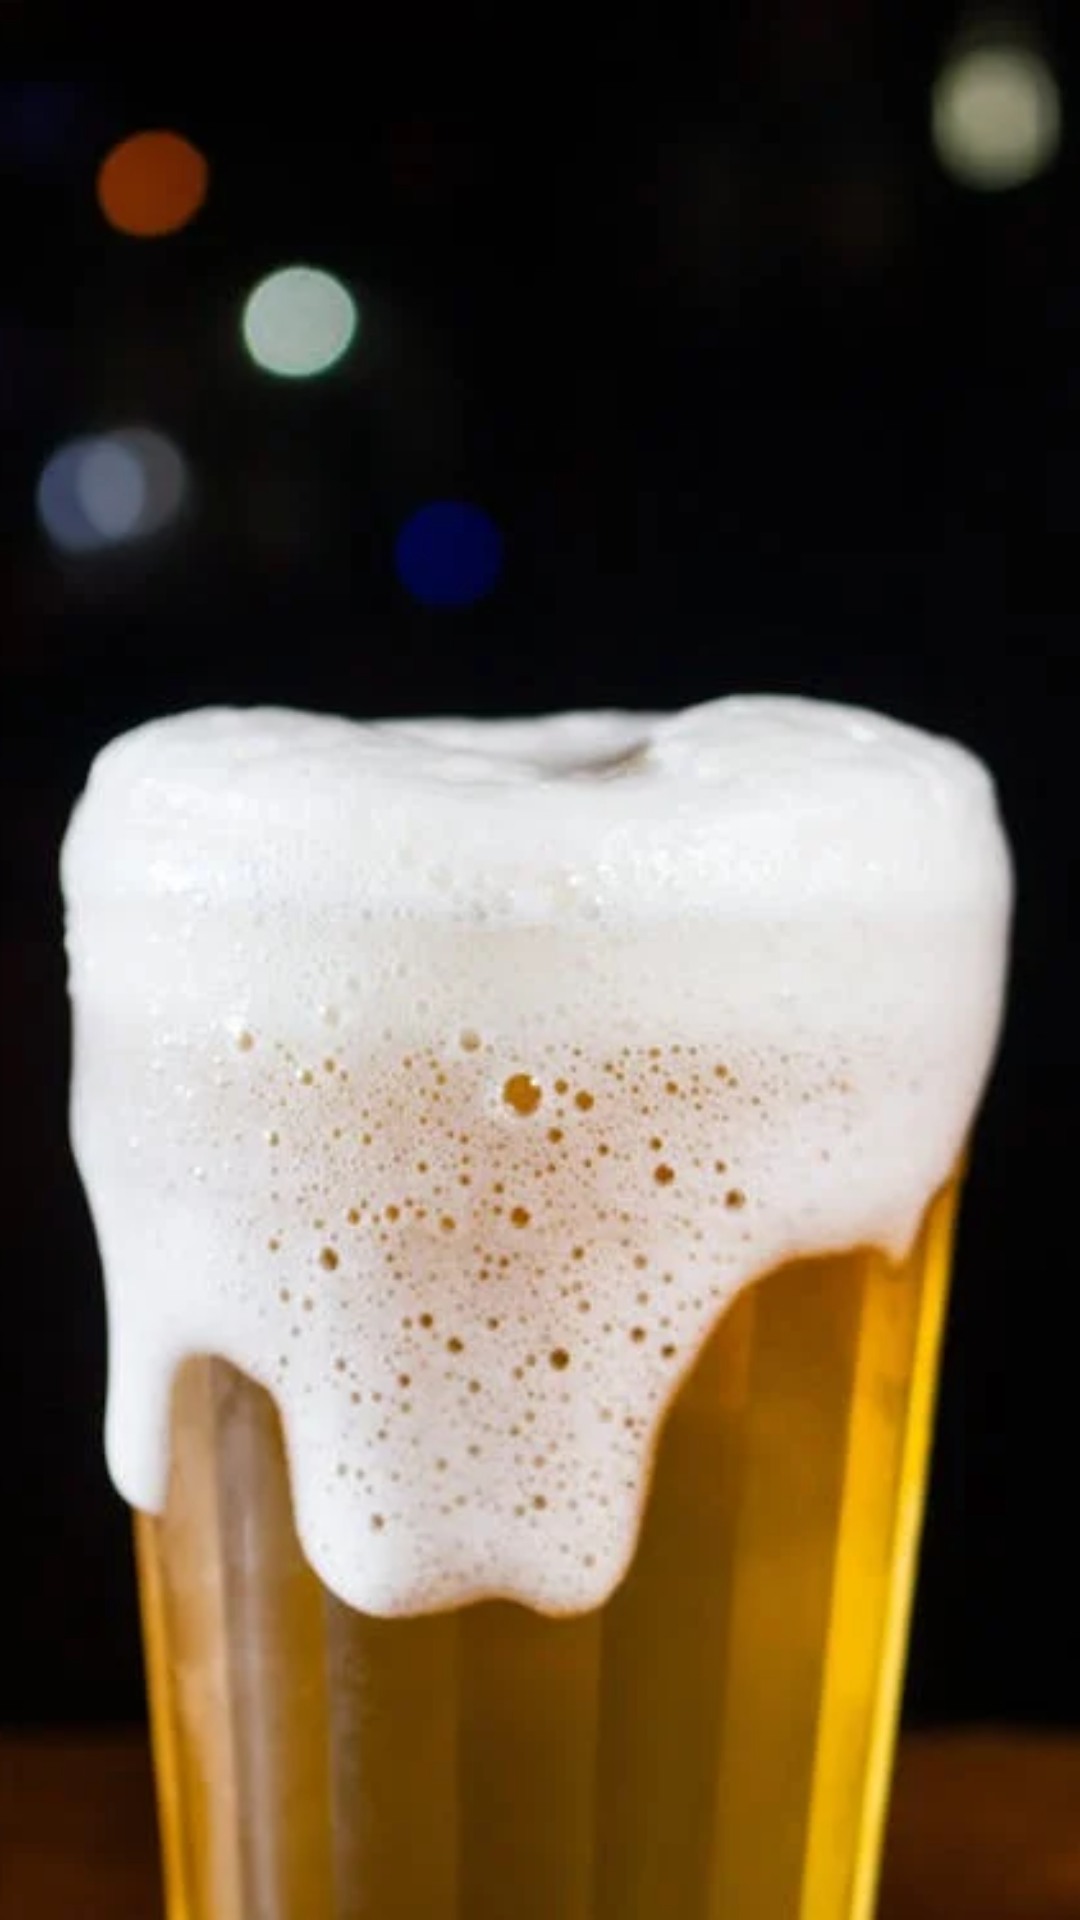 How much alcohol goes into the stomach with beer